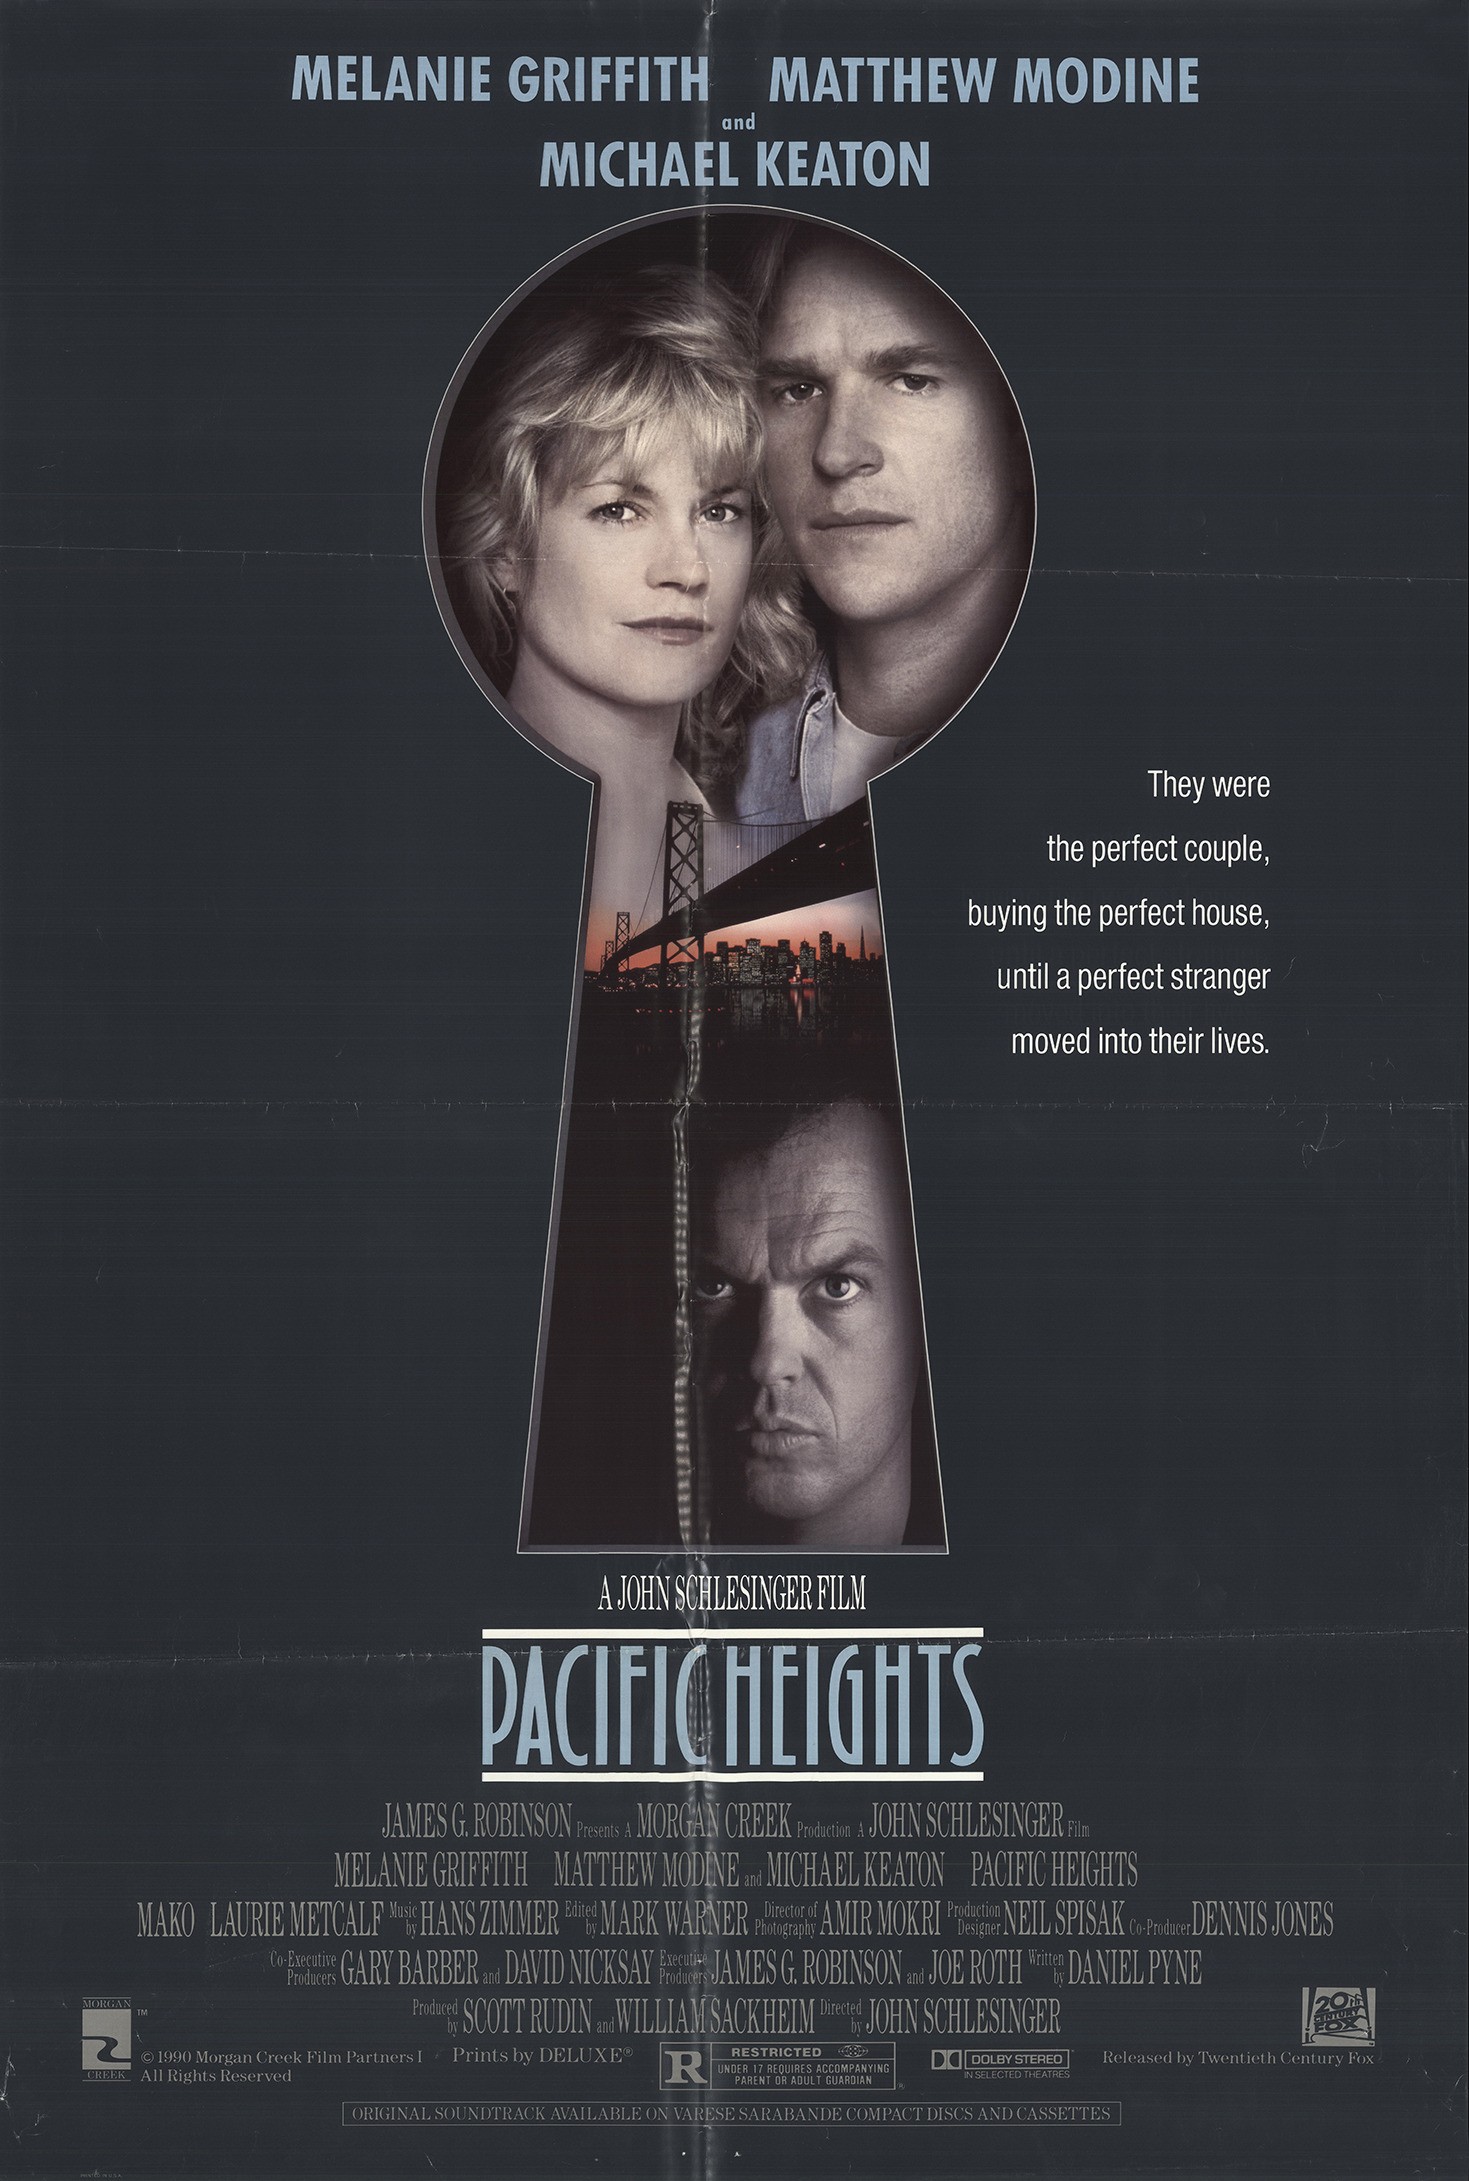 Mega Sized Movie Poster Image for Pacific Heights 